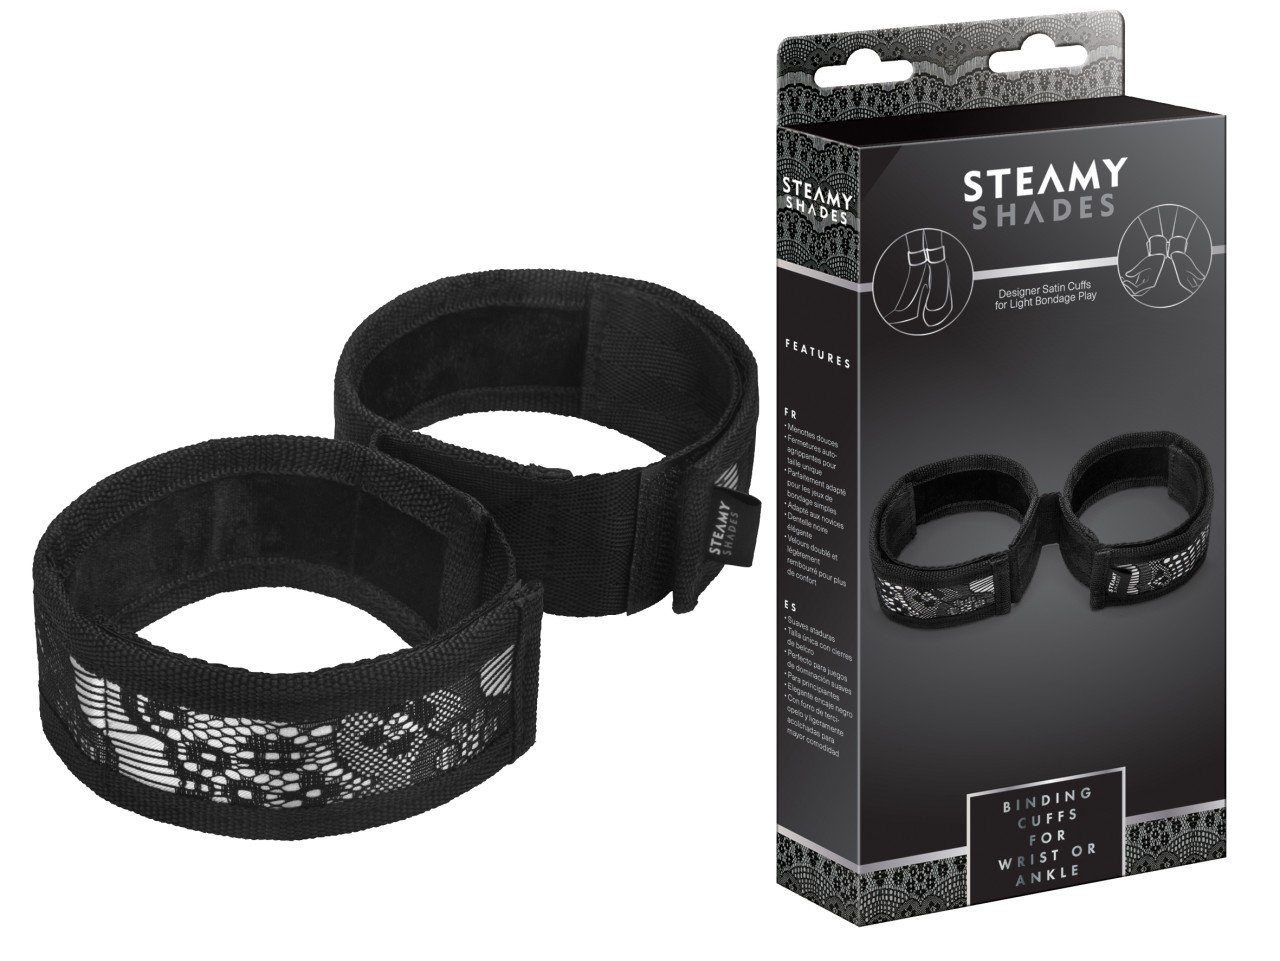 SHADES Bondage-Set STEAMY Binding Wrist or Cuffs Ankle STEAMY for SHADES